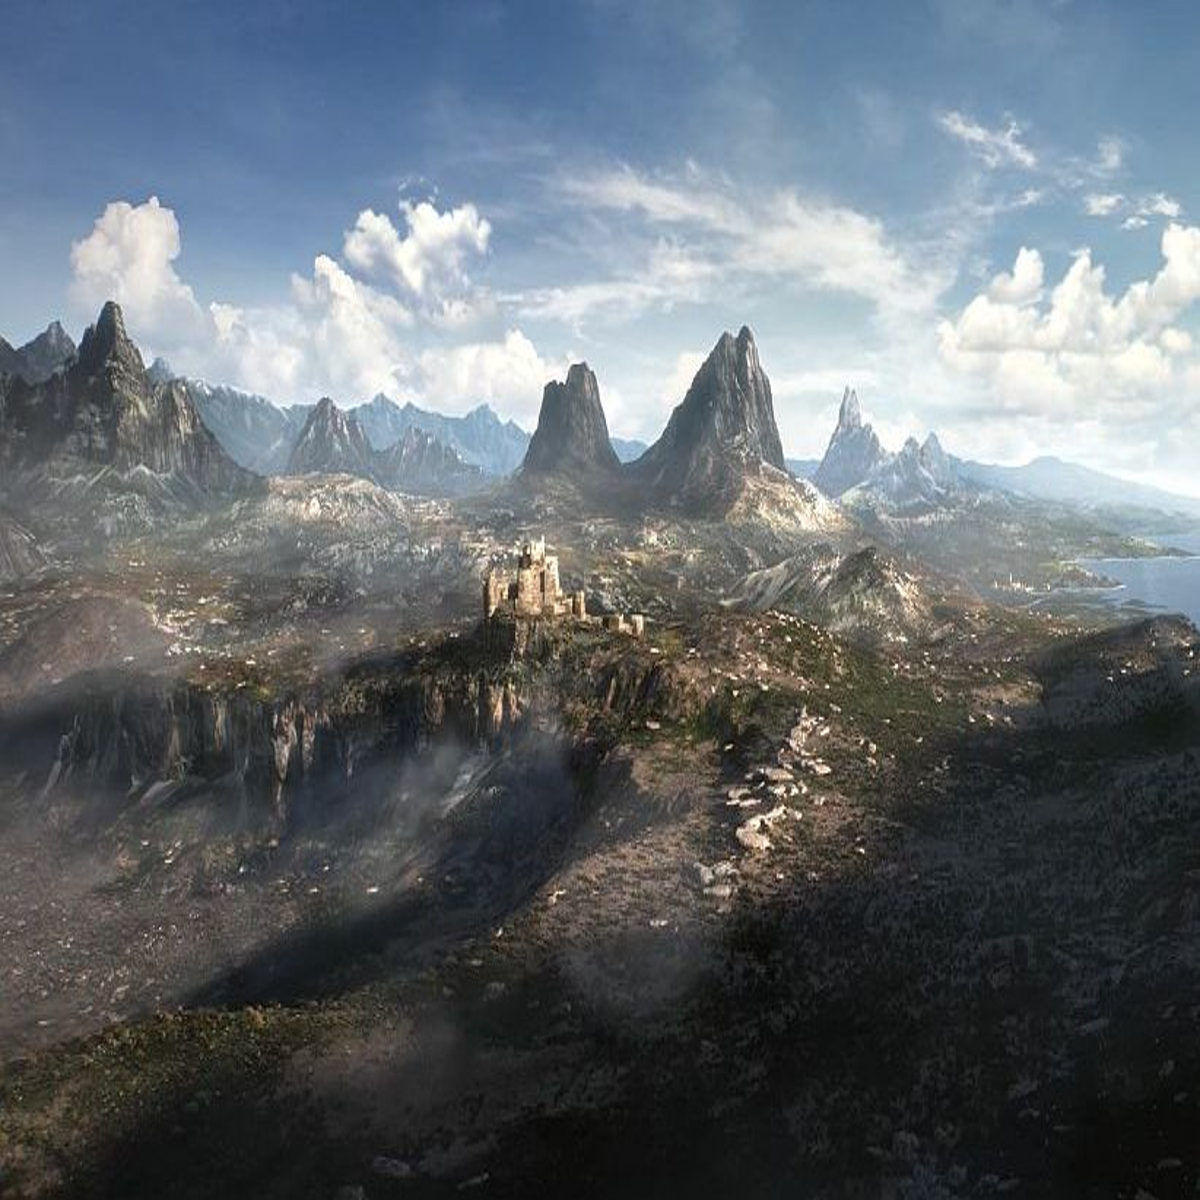 The Elder Scrolls 6 for PS5 looks more and more like a fantasy